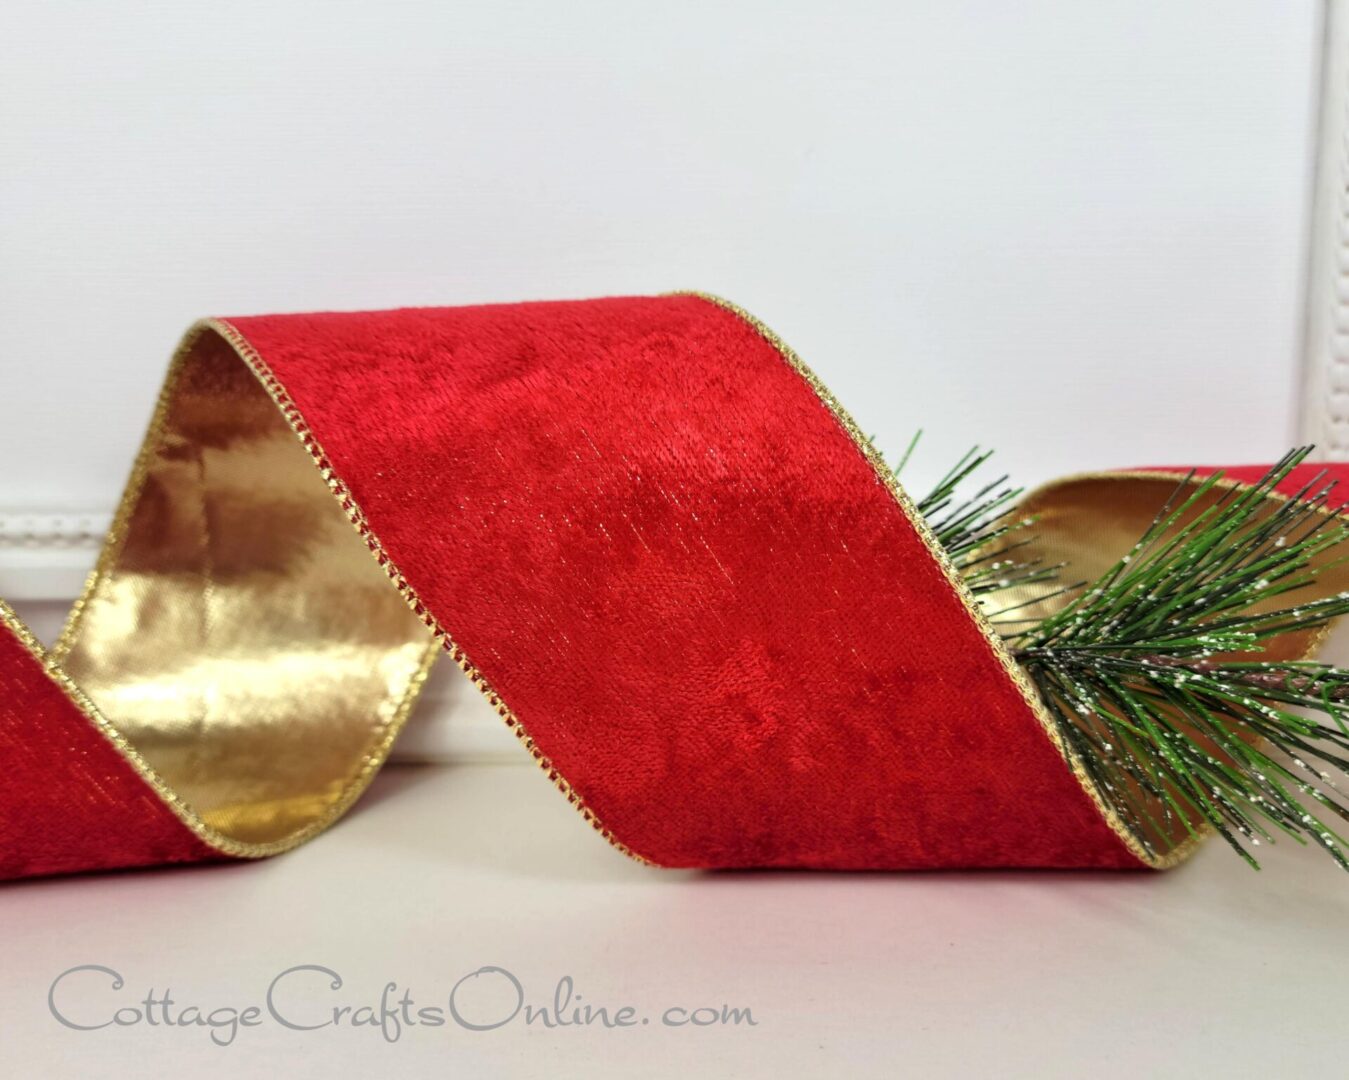 A red ribbon with gold trim and pine needles.